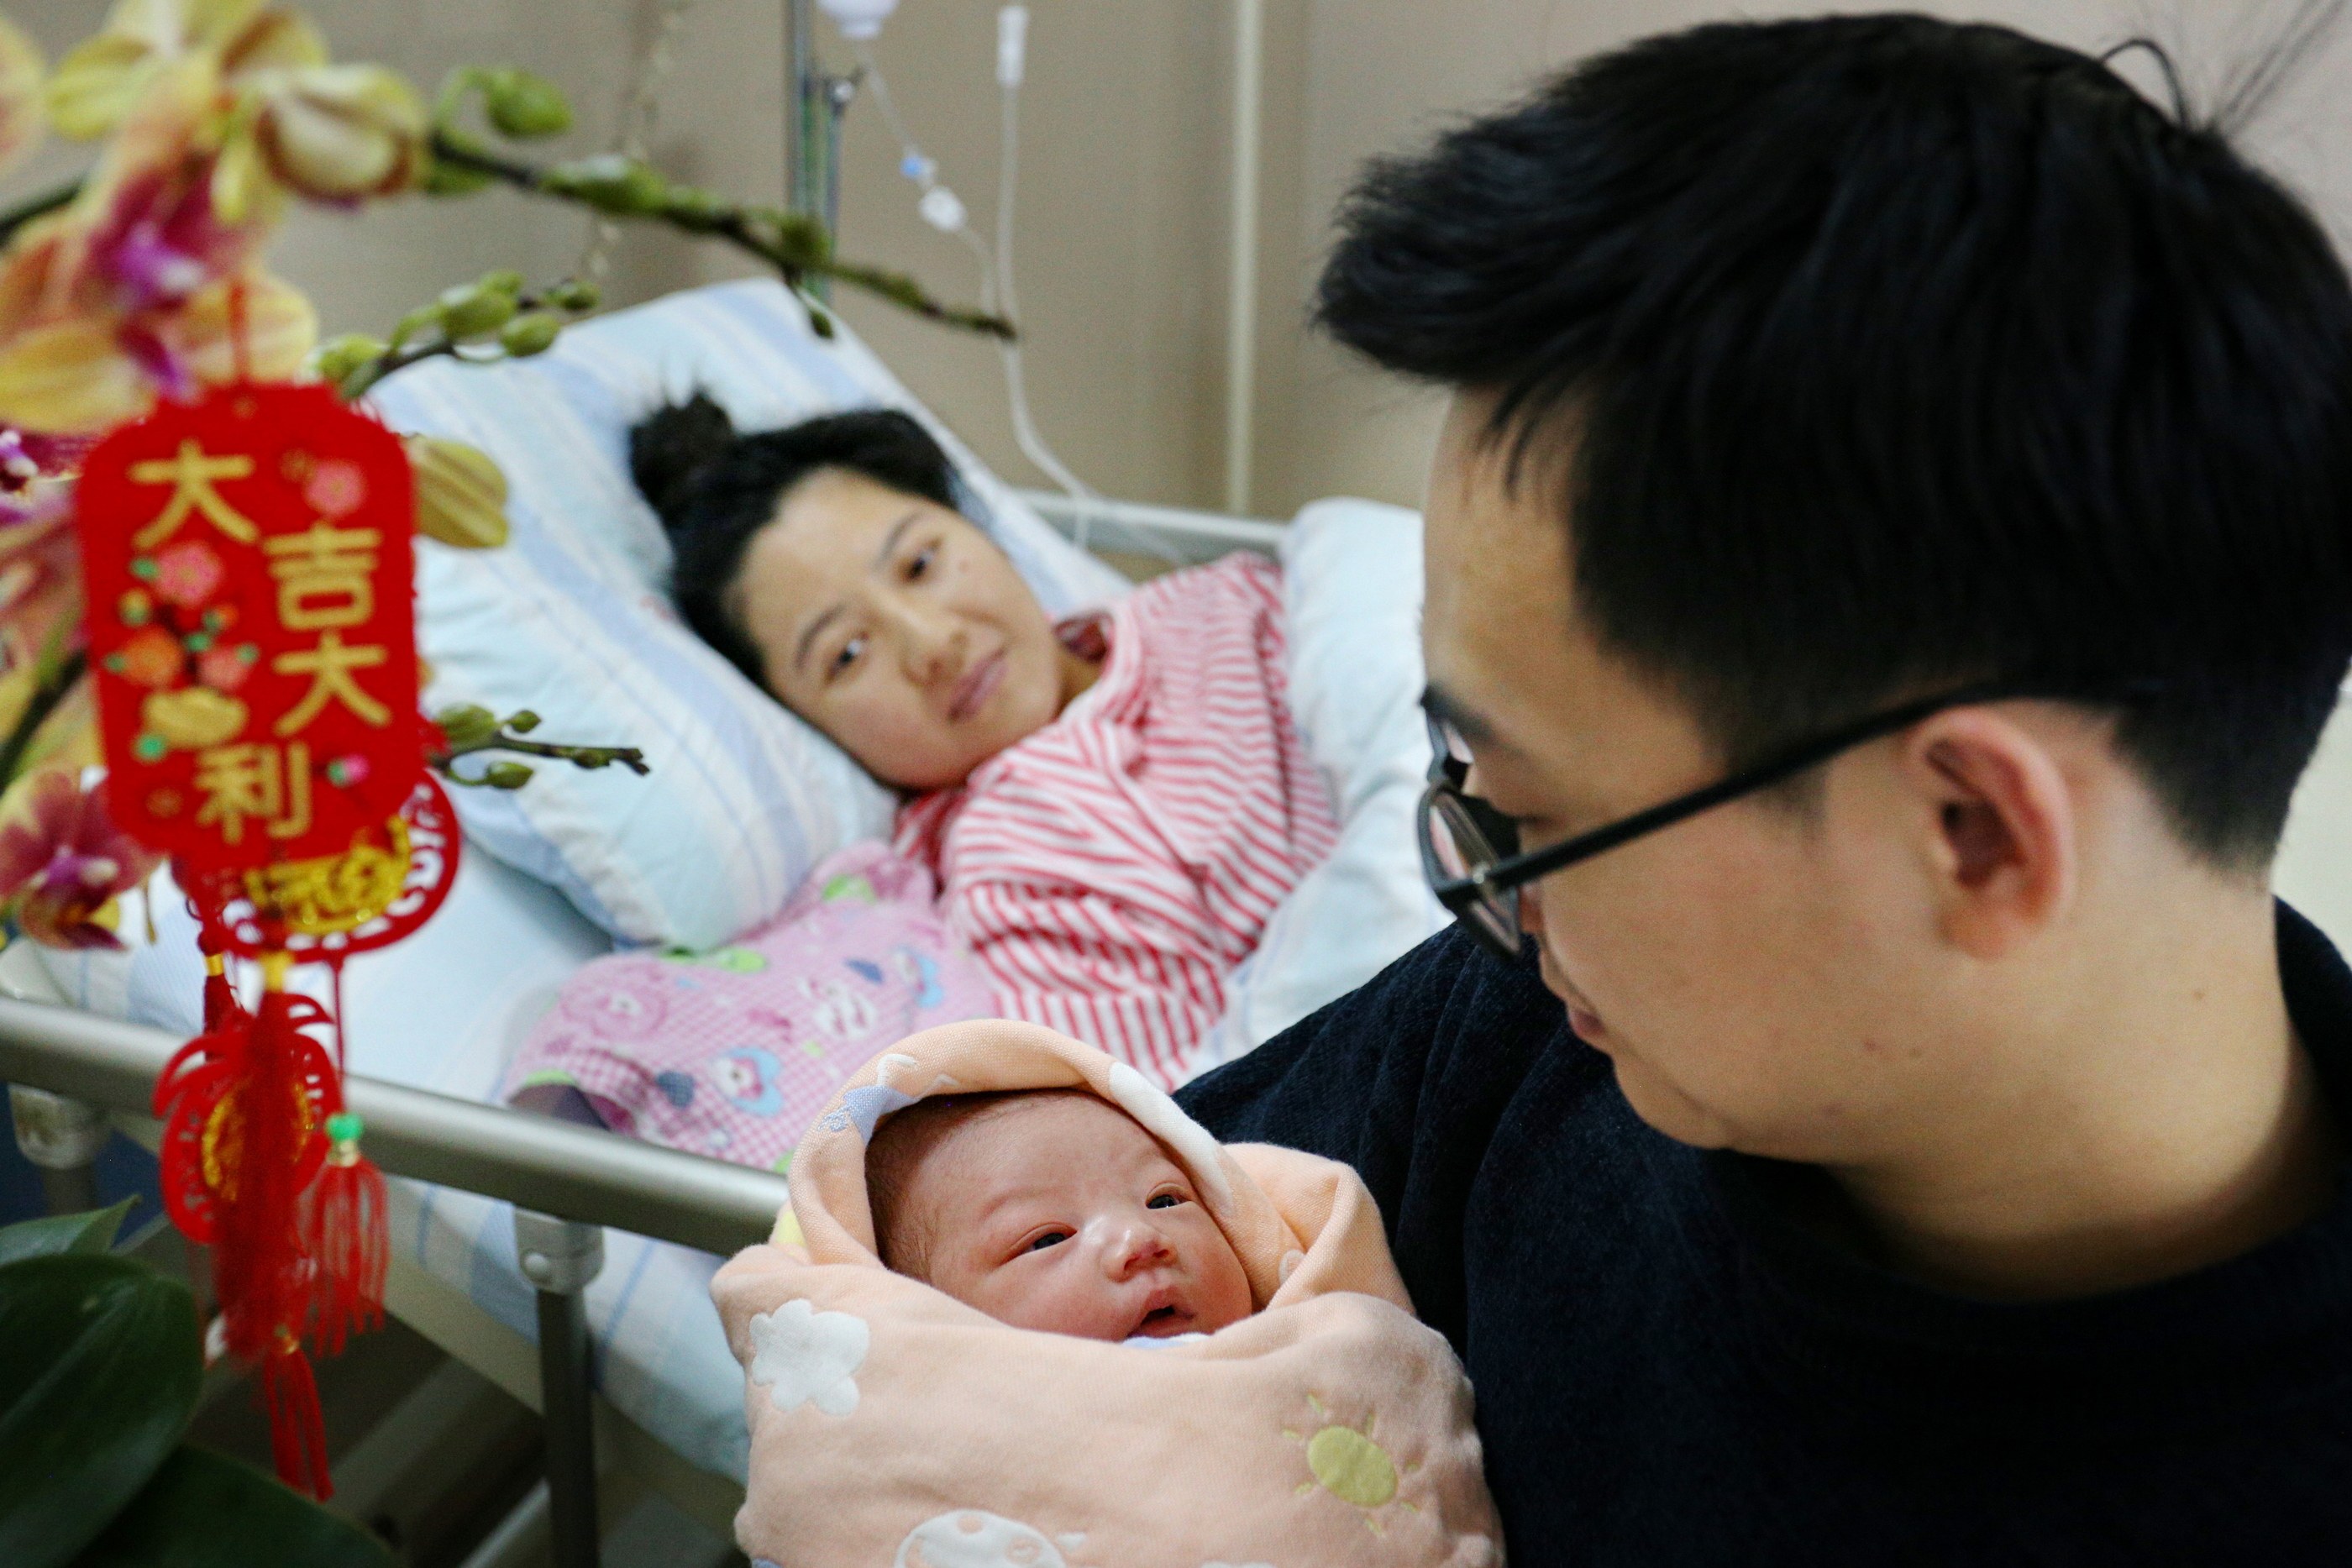 A Chinese couple pictured with their newborn baby at a hospital in Heshan, south China’s Guangdong province, on February 10, the first day of the Year of the Dragon in the Chinese zodiac. Photo: Xinhua